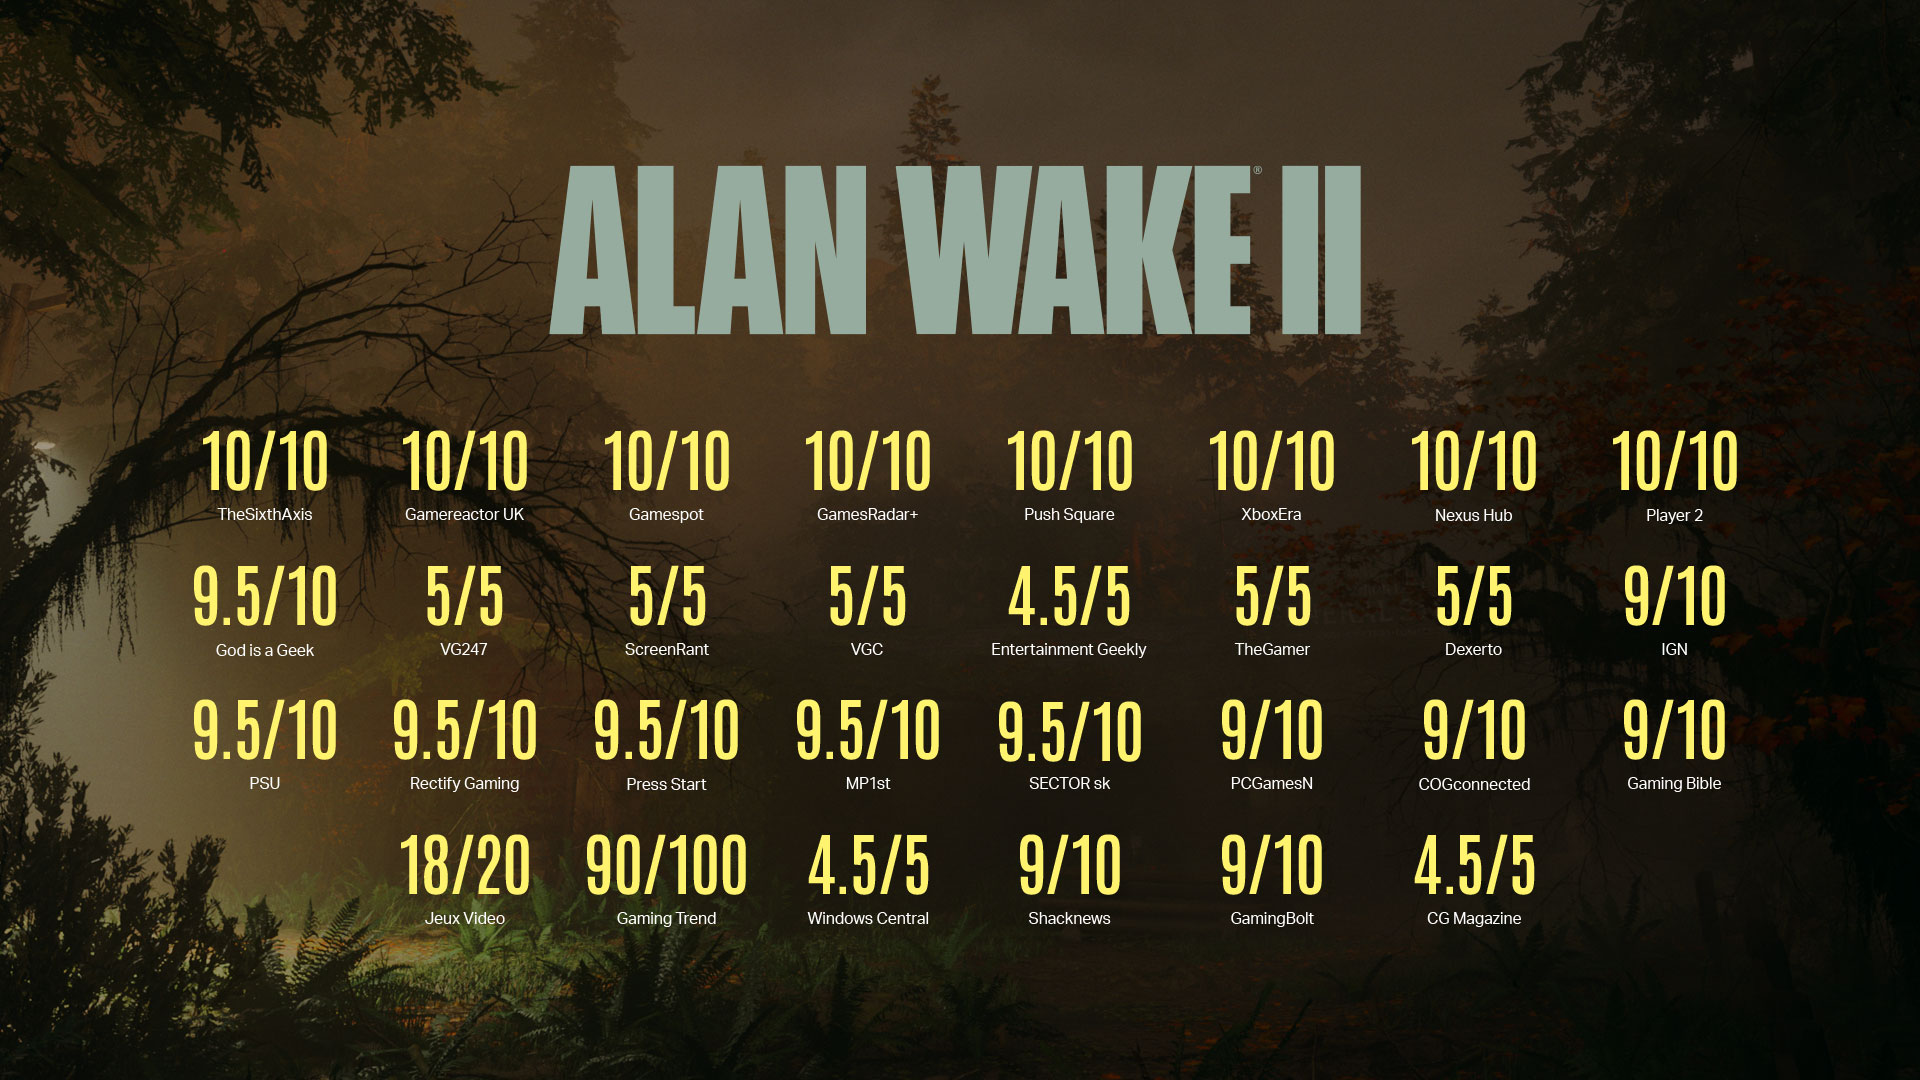 What Review Score Would You Give Alan Wake 2?